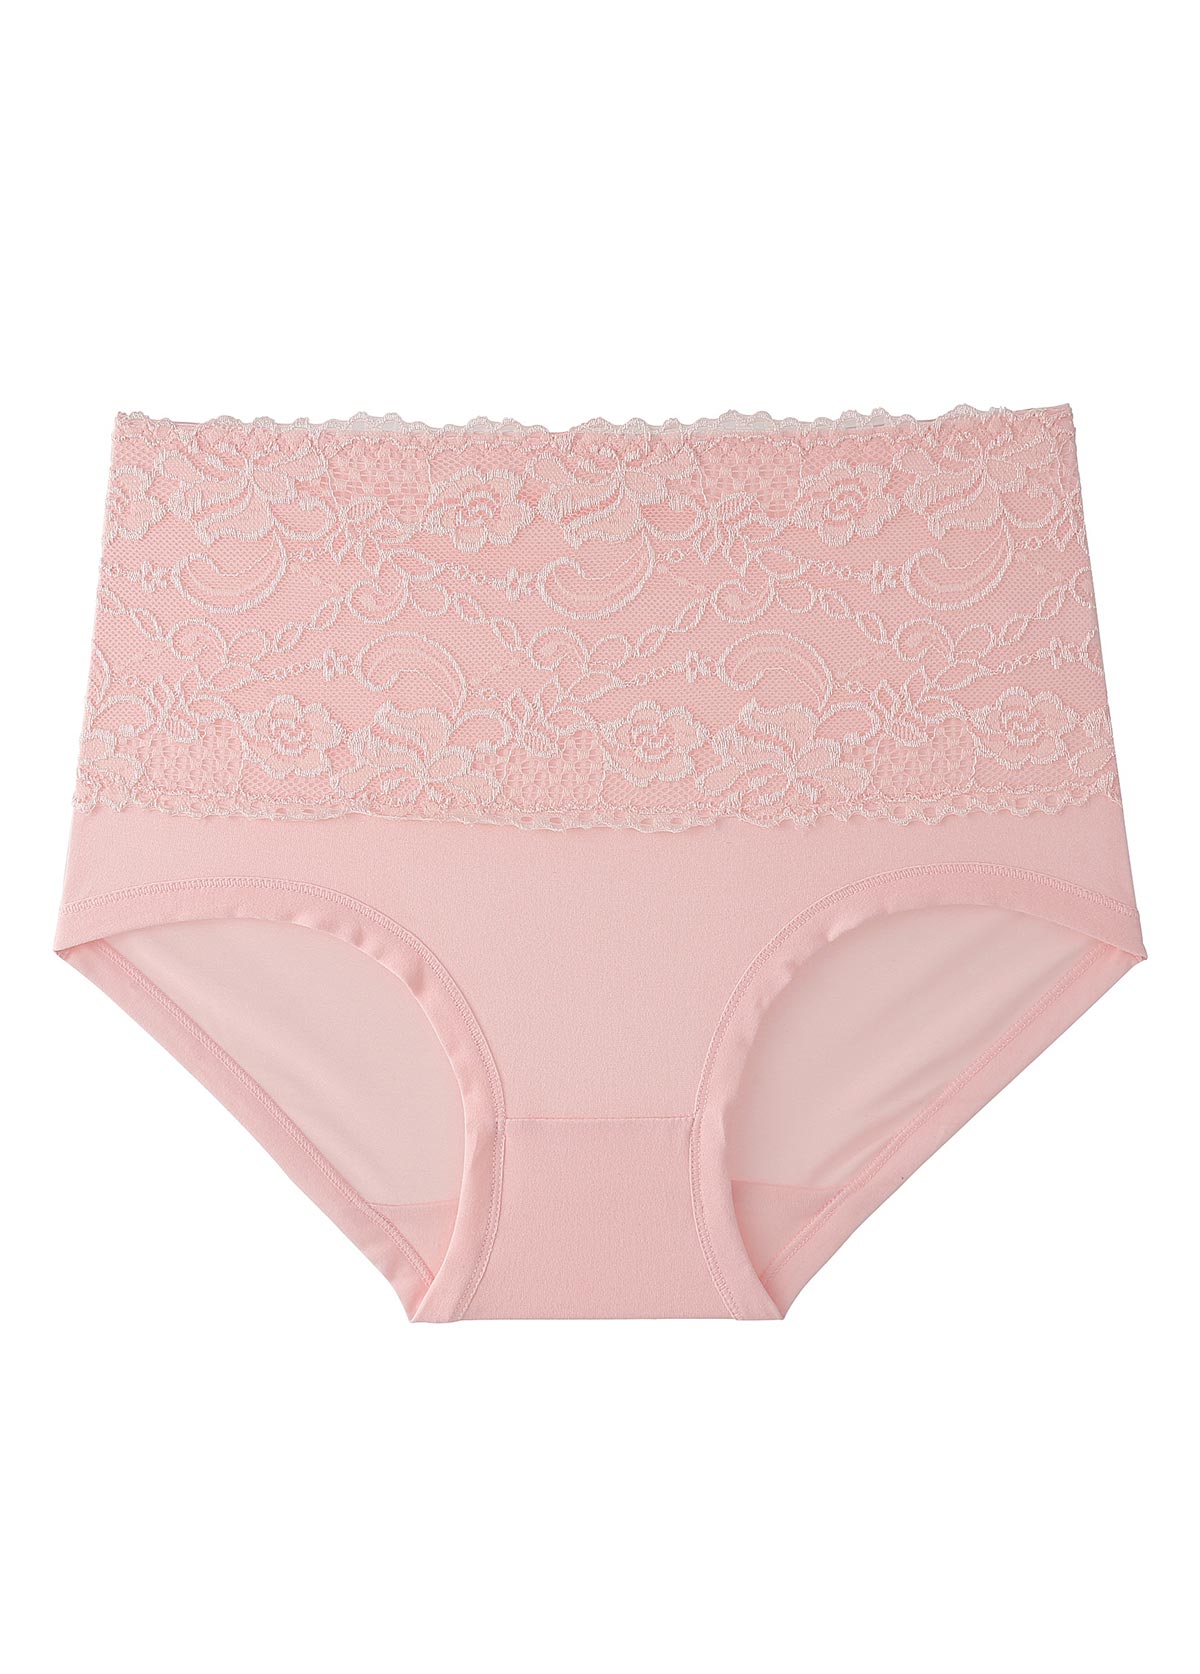 Lace Patchwork Light Pink High Waisted Panty